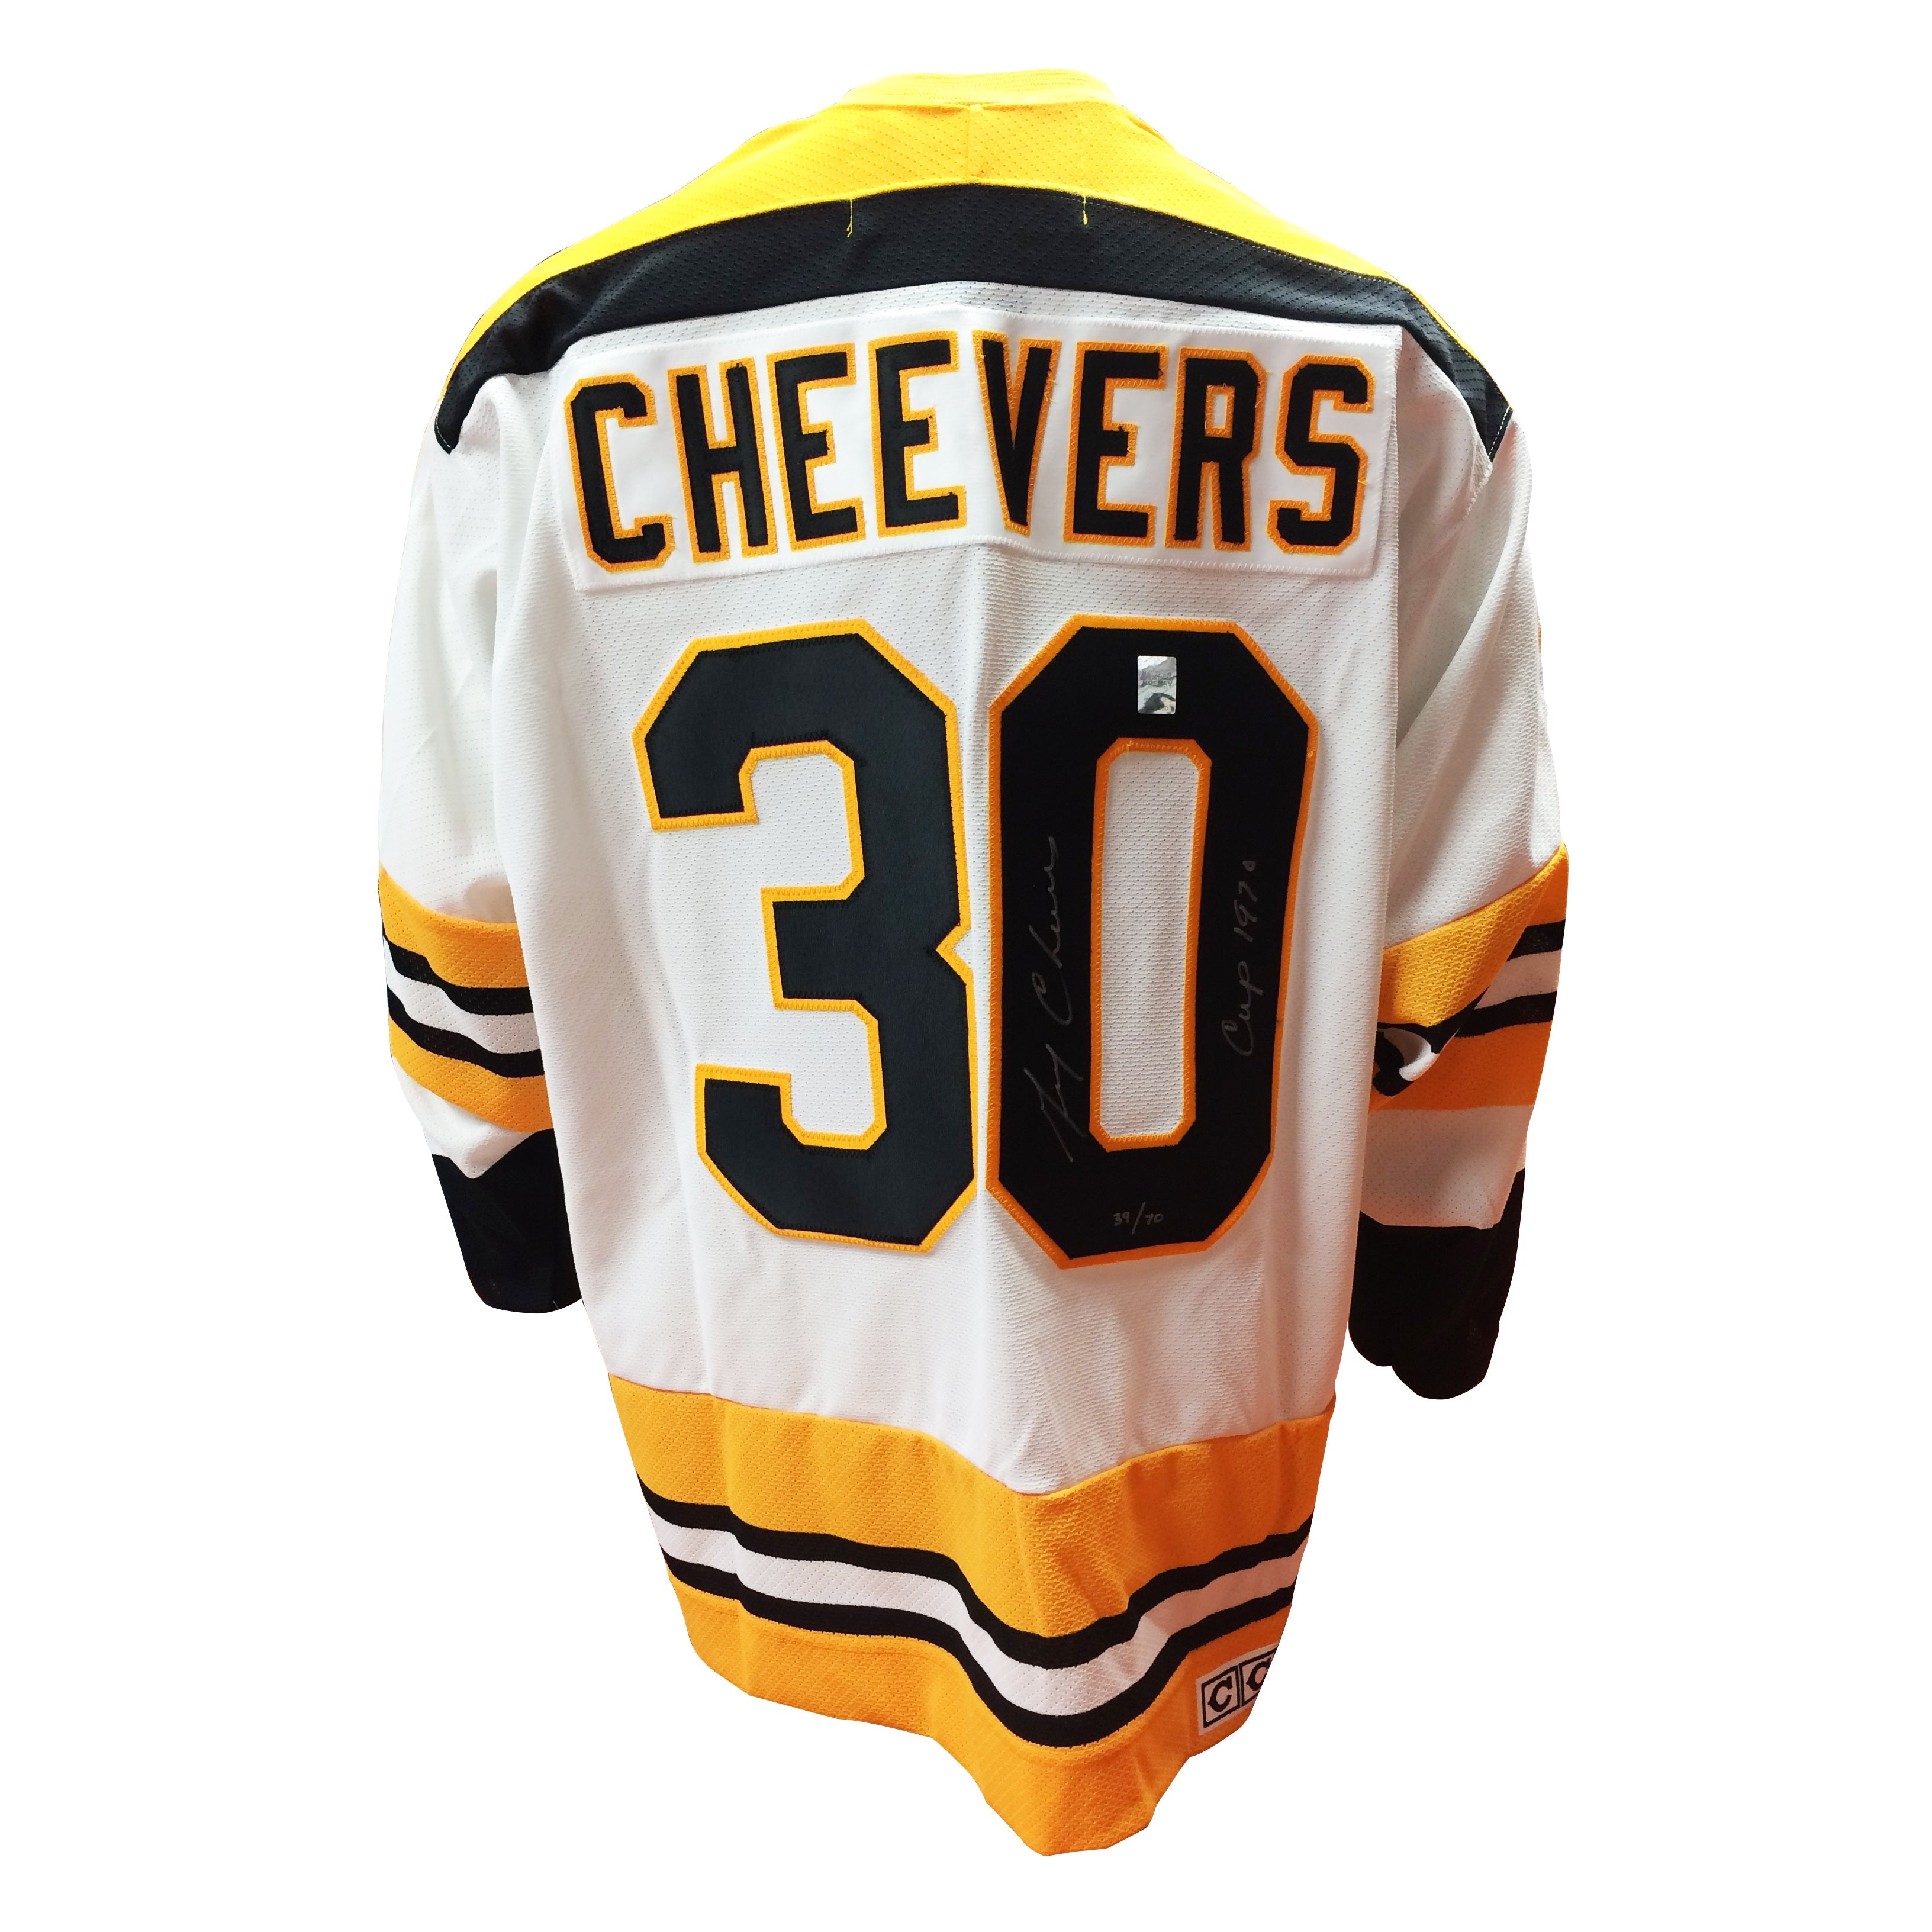 Gerry Cheevers Signed Boston Bruins Vintage Away Jersey - Heritage Hockey™